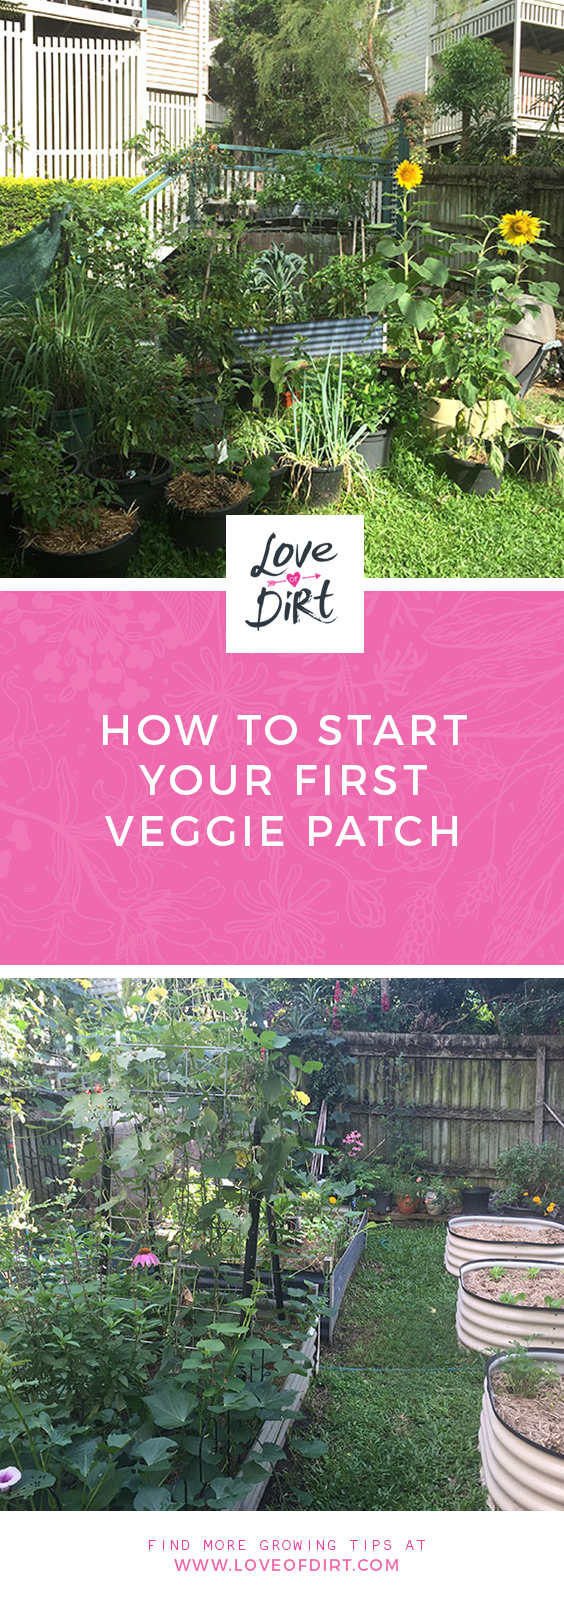 How to start your first veggie patch